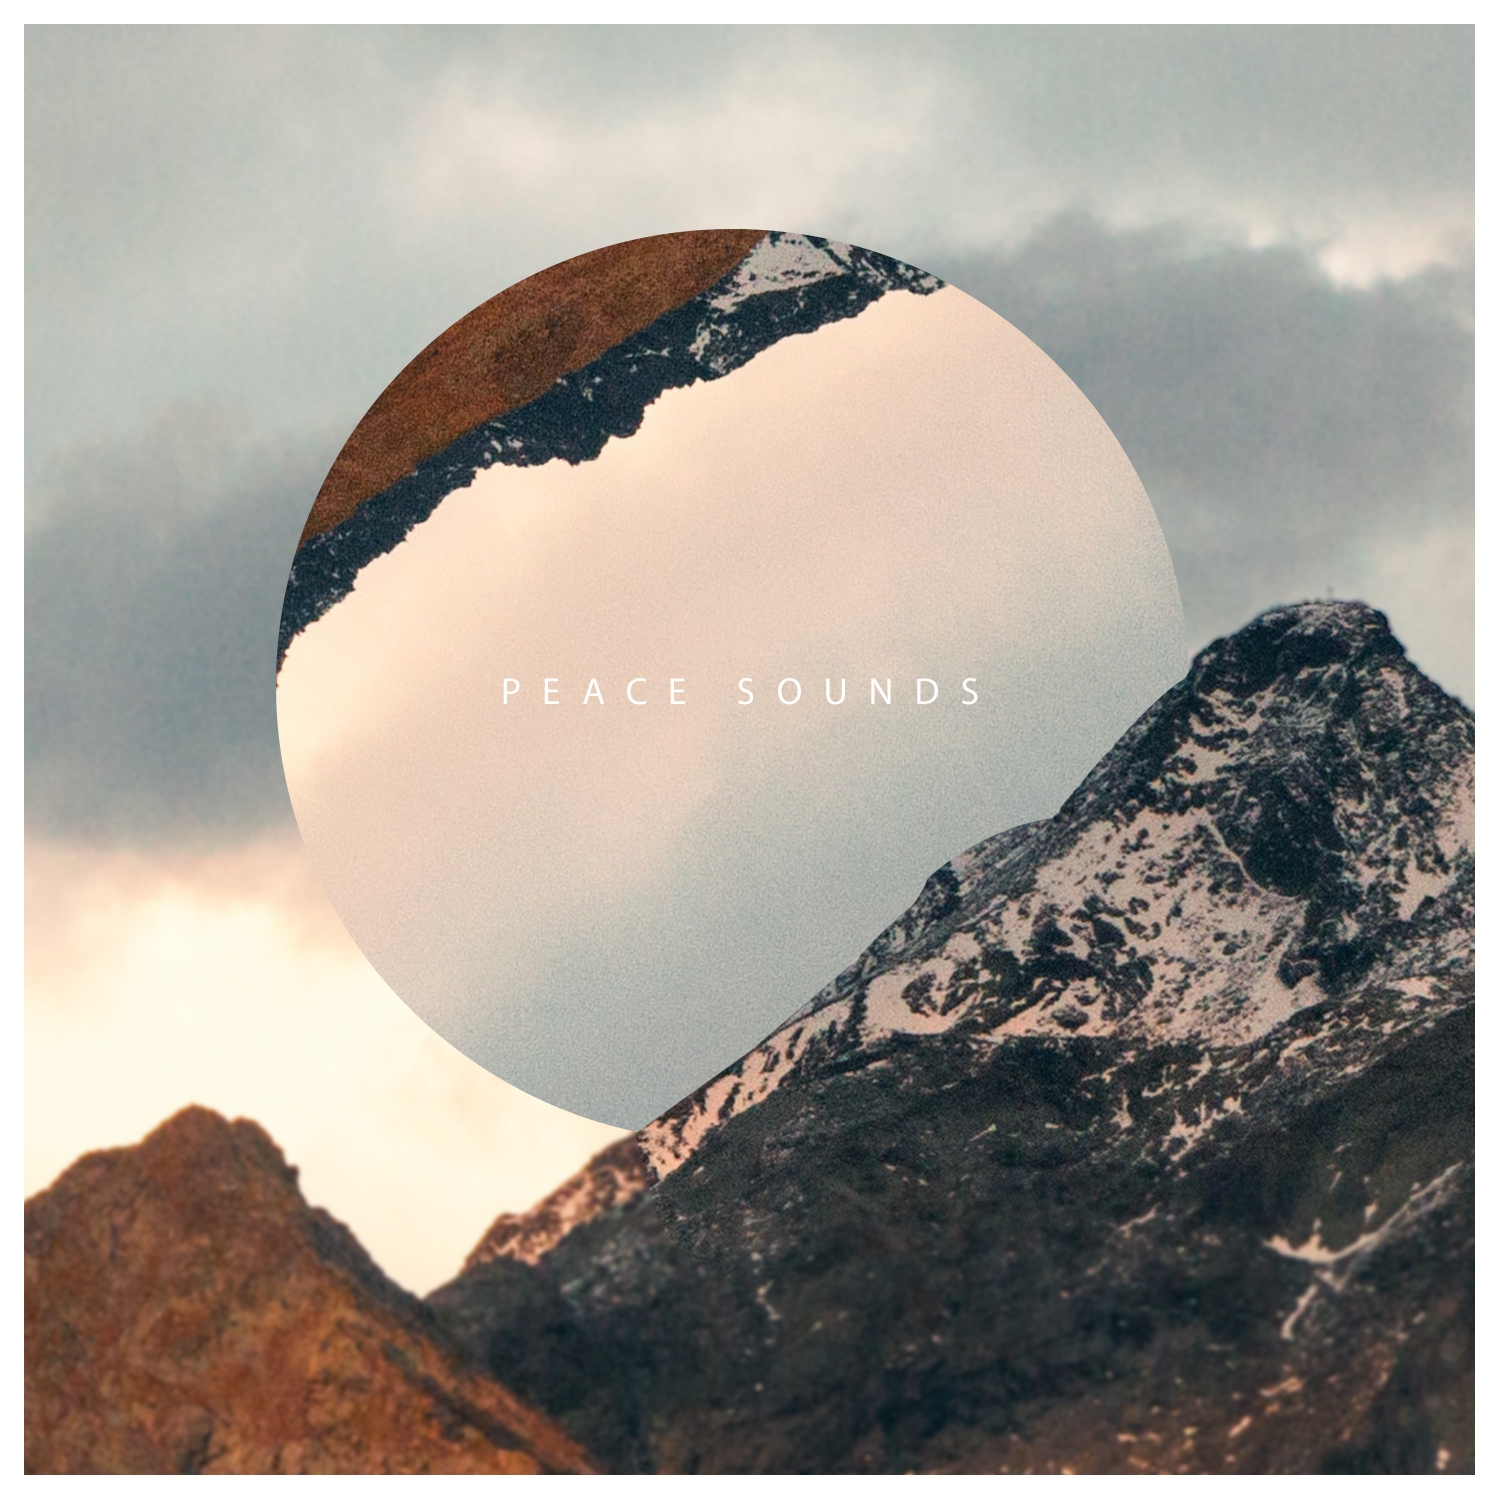 18 Perfect Peace Sounds